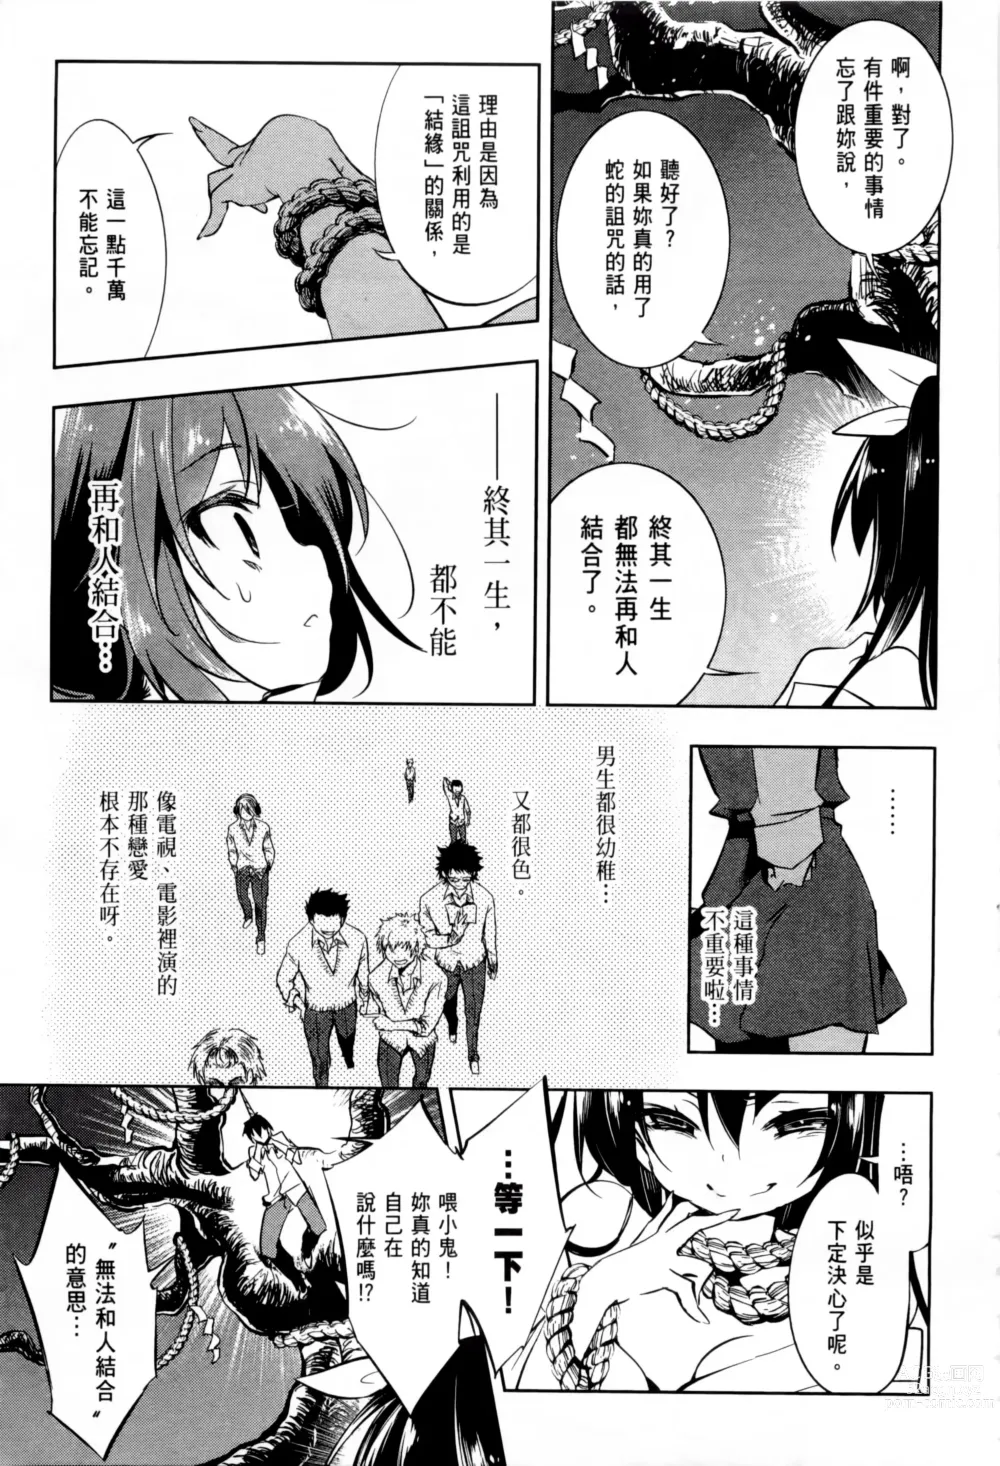 Page 23 of doujinshi 神さまの怨結び 全1-6巻